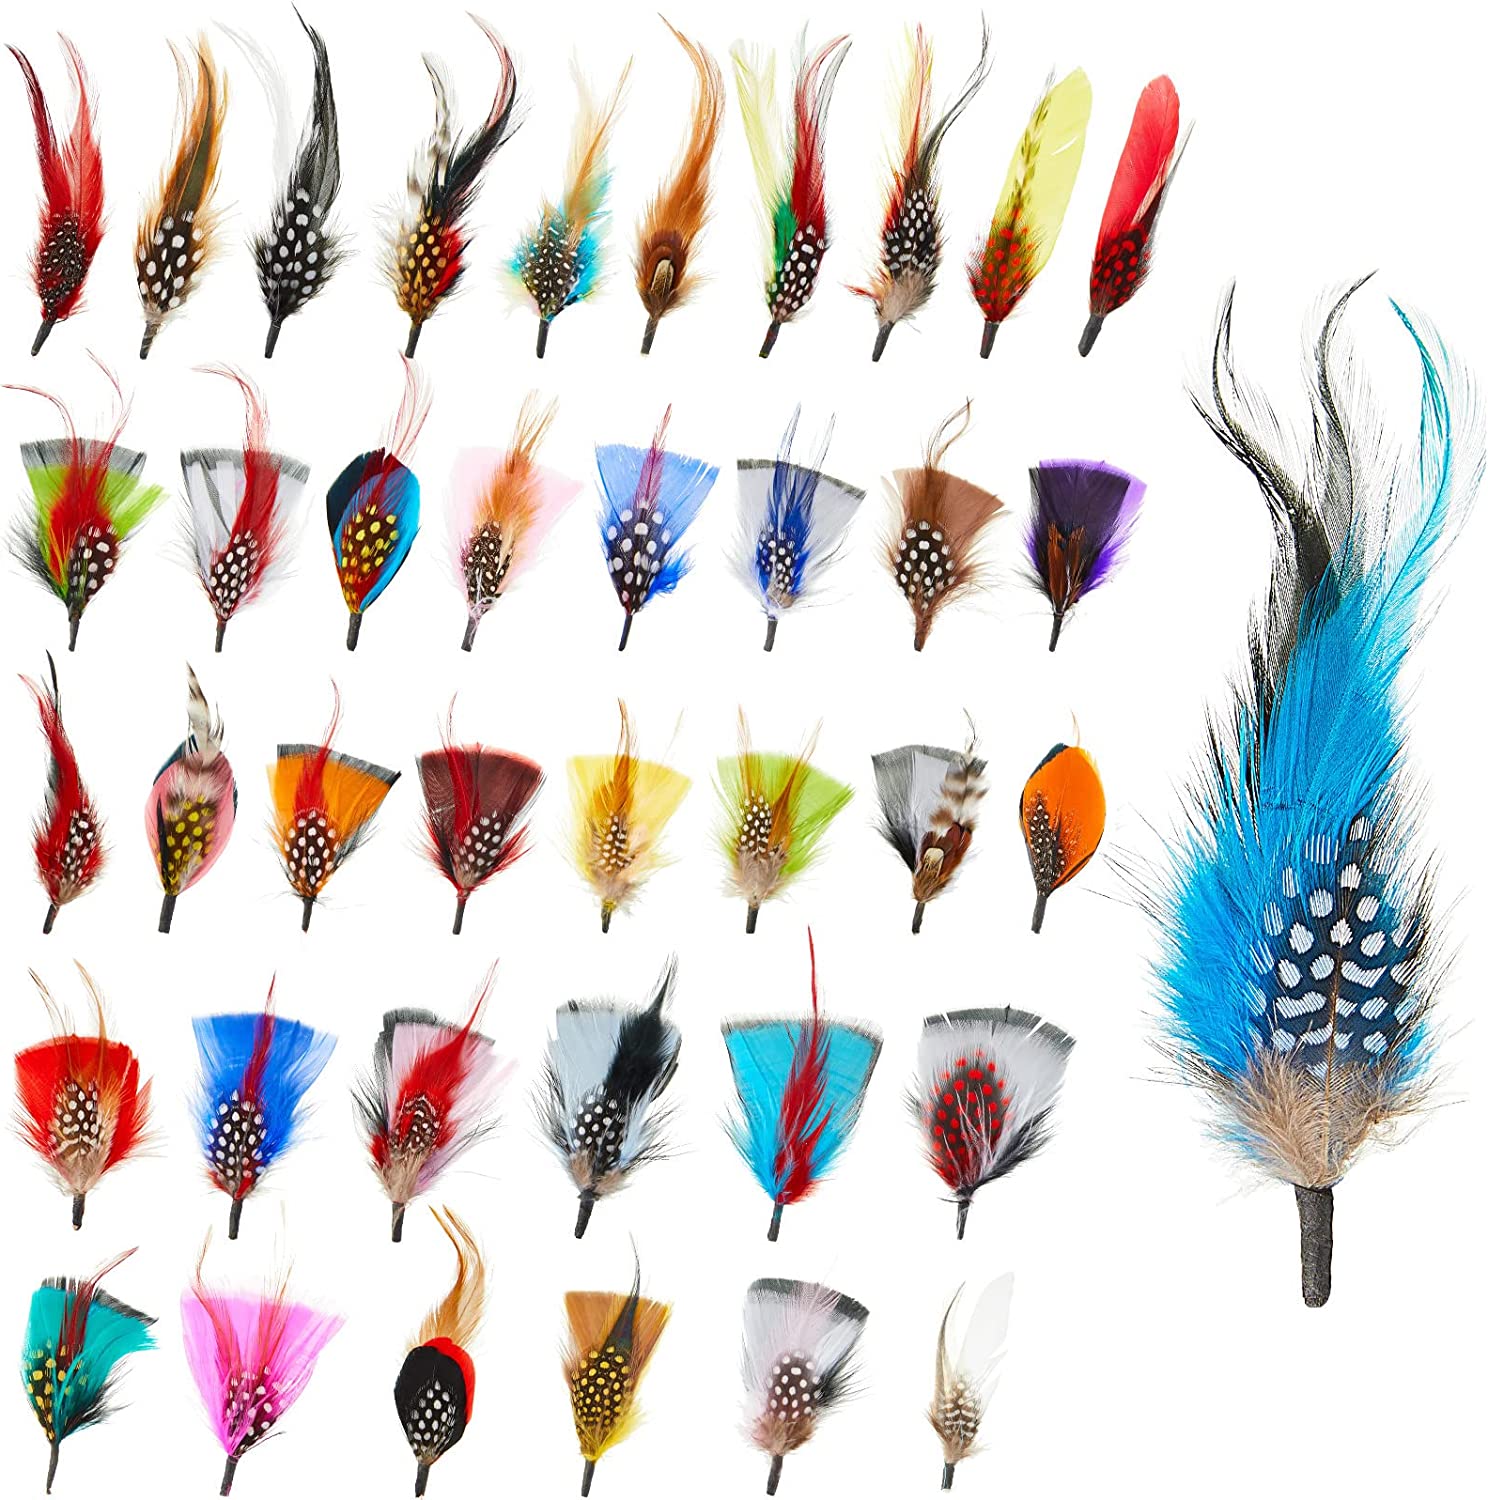 Flying Feathers 40pcs Natural Pheasant Feathers, Spotted Feathers, Turkey Feathers, 4 Styles Feathers for Crafts DIY Hat Floral Arrangements Wing